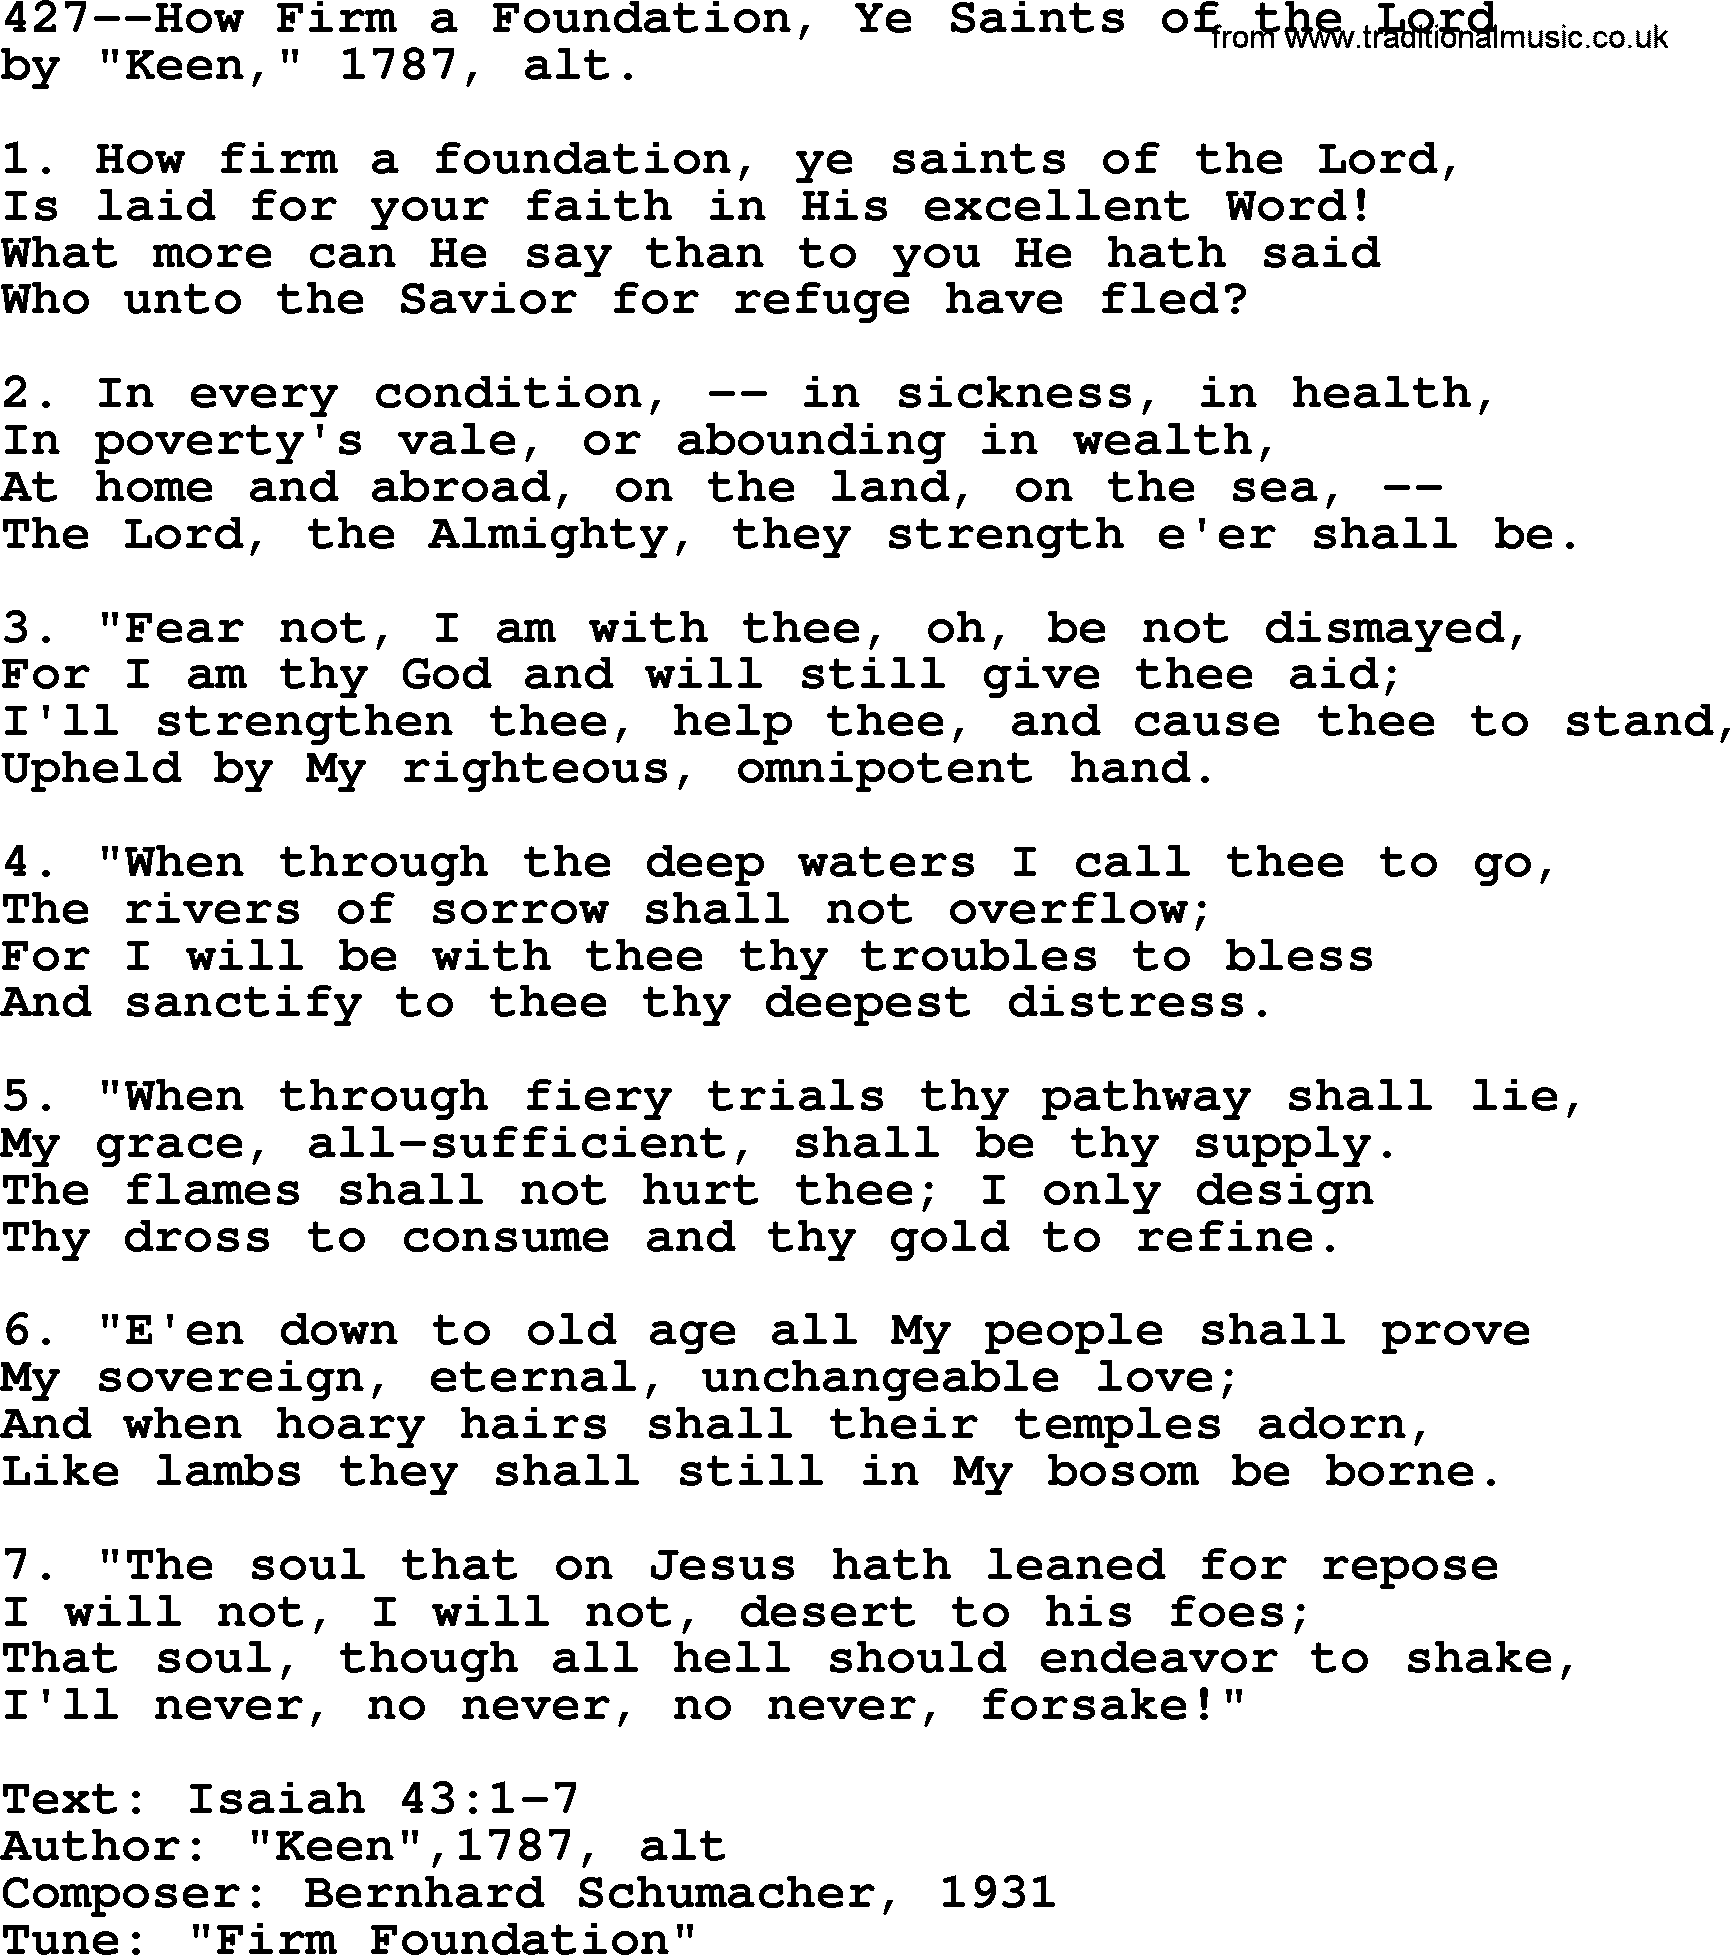 Lutheran Hymn: 427--How Firm a Foundation, Ye Saints of the Lord.txt lyrics with PDF